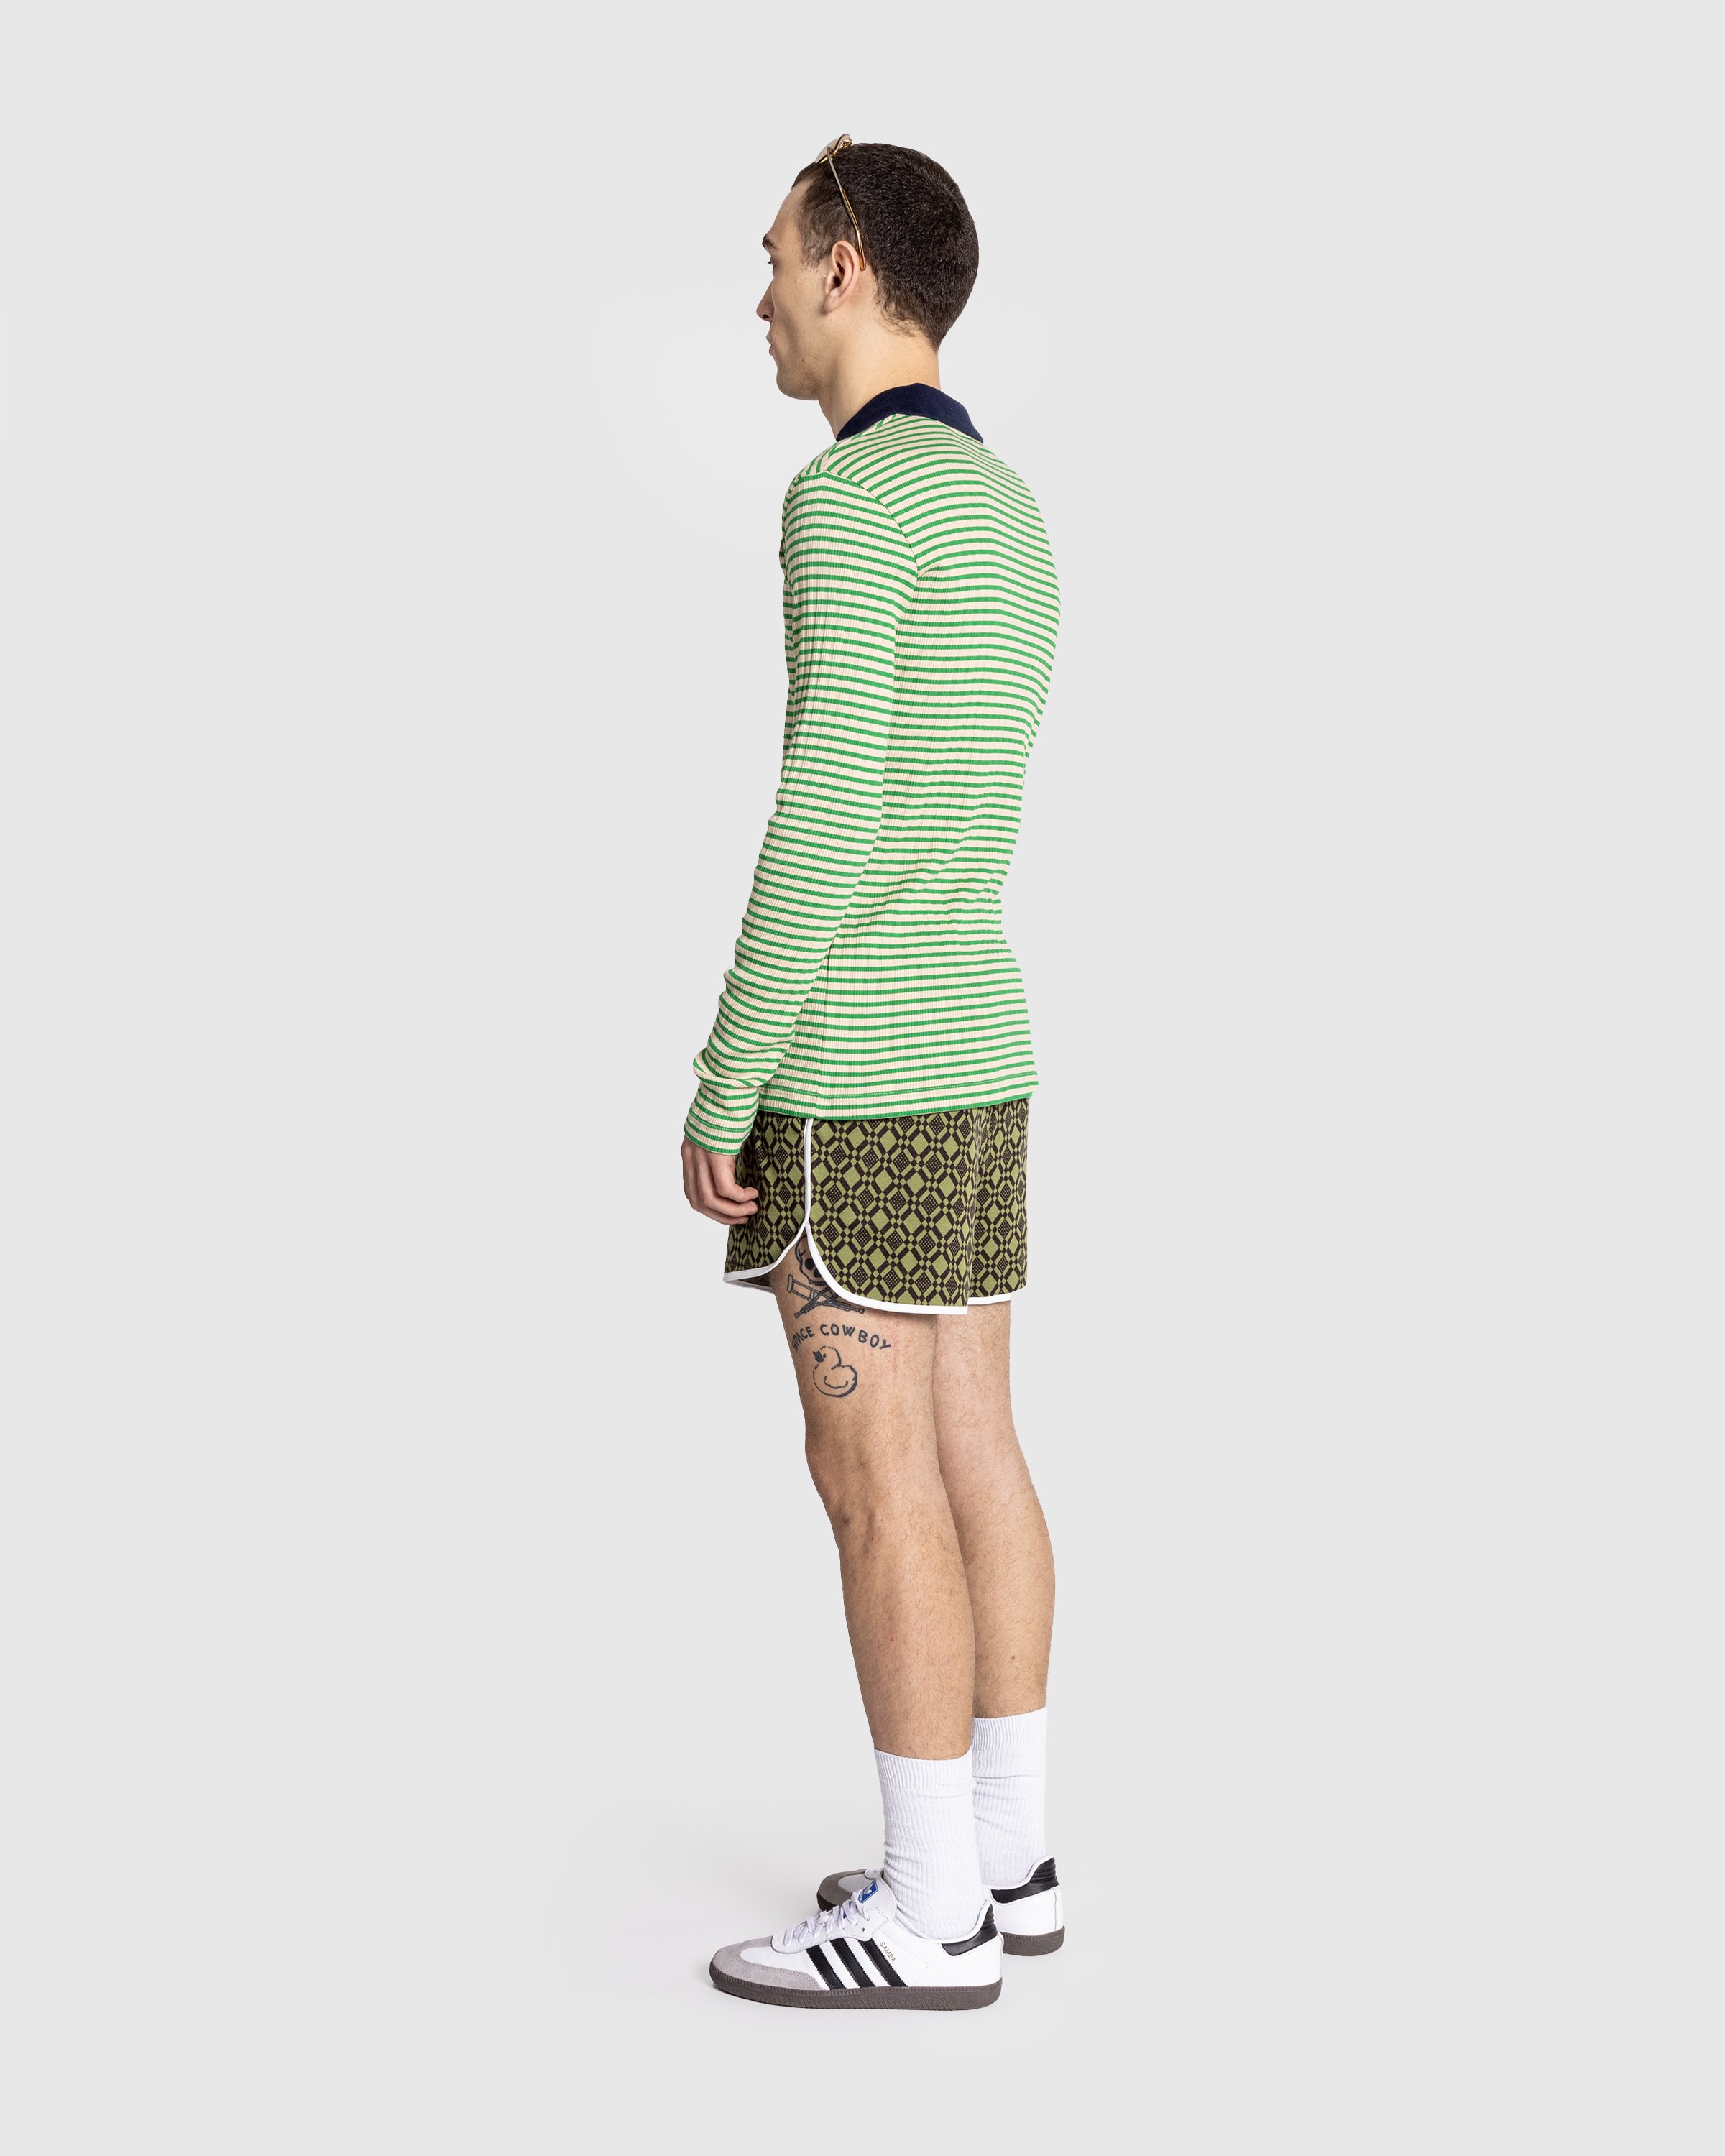 Wales Bonner - Polo Striped Green - Clothing - Green - Image 4